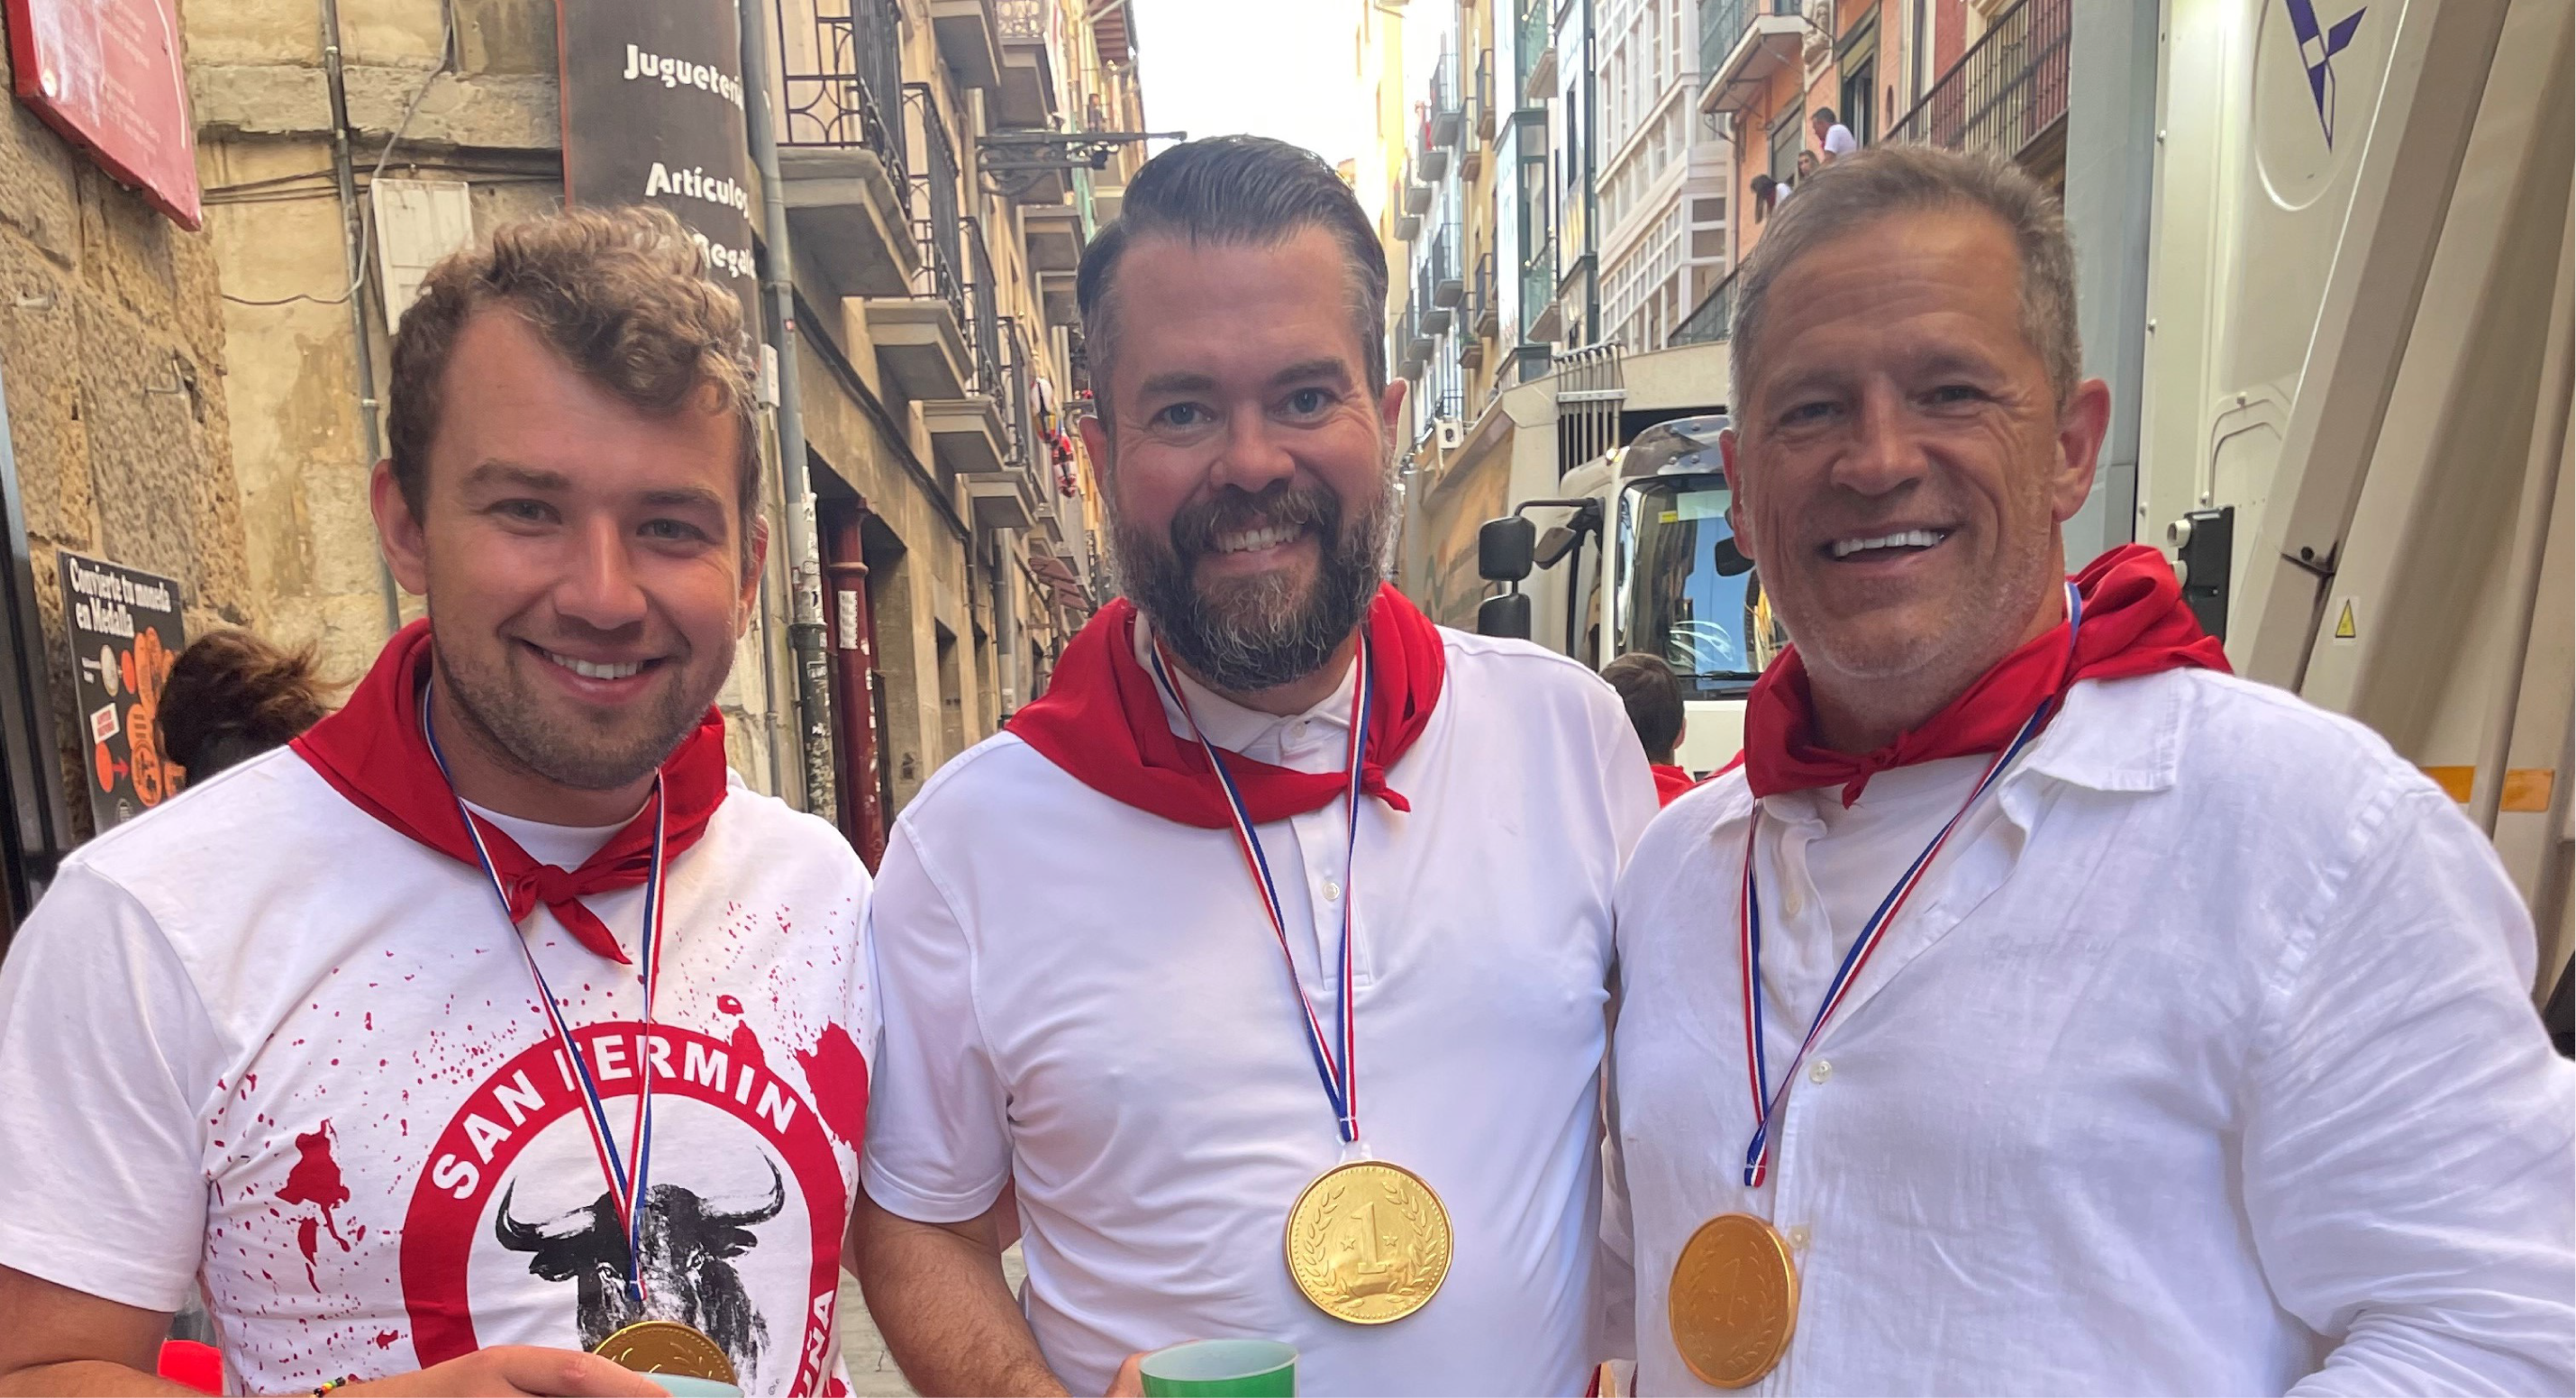 Bobby Saxon, right, celebrates with his stepson, Gage Wampler, left, a first lieutenant in the U.S. Army, and a friend, Greg Jacobson, in traditional white garb and red sashes after running with the bulls in Pamplona in July. Bobby convinced both to participate in the event. The medals are actually chocolate coins covered in gold foil. 